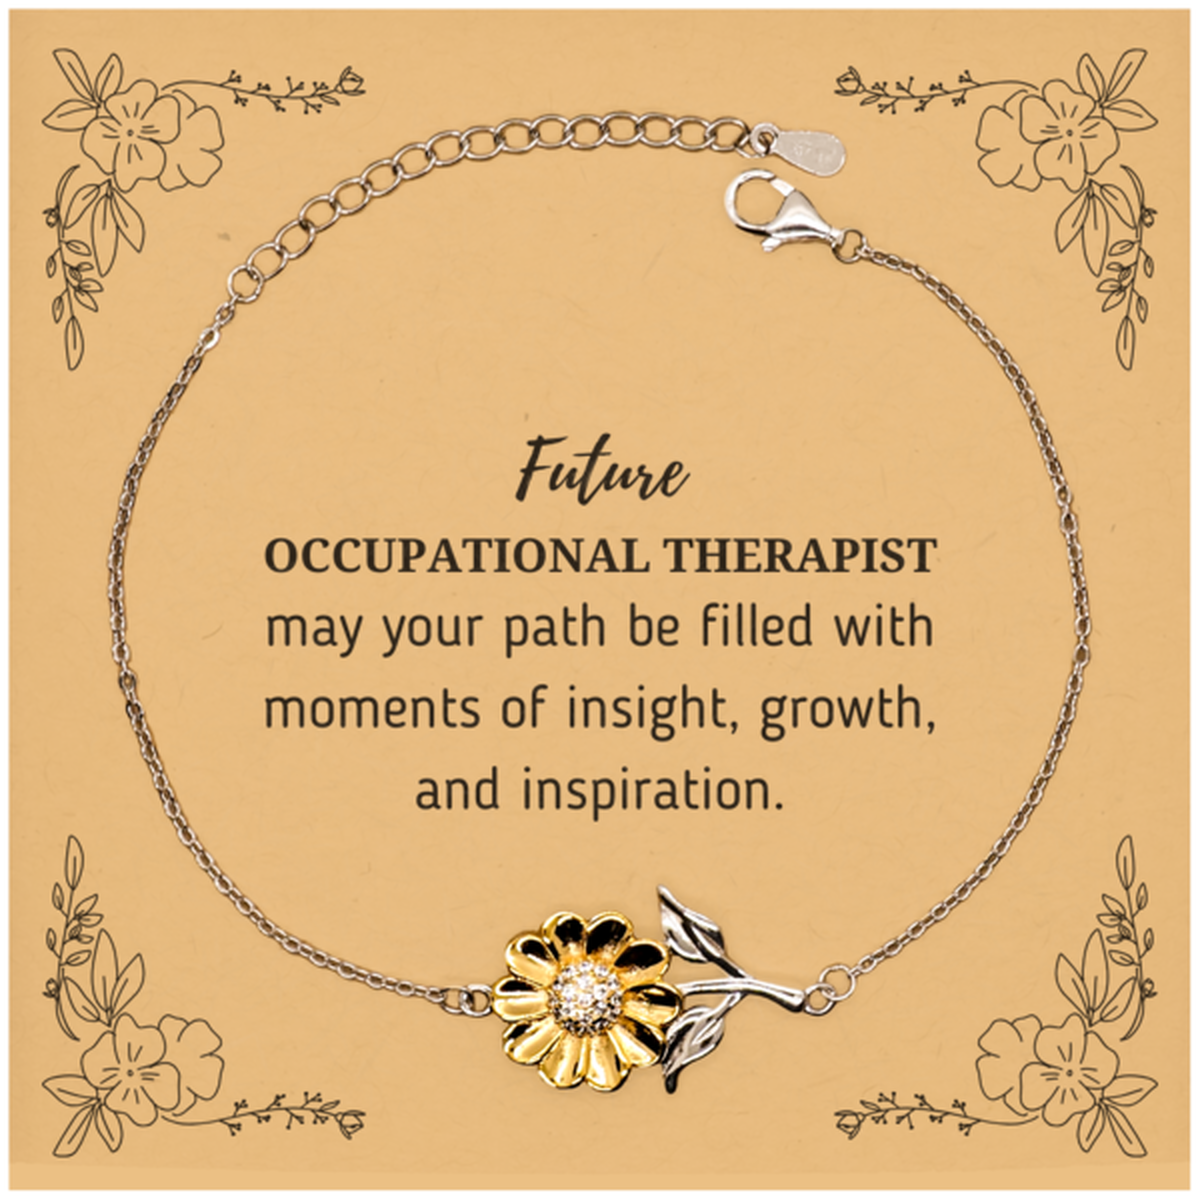 Future Occupational Therapist Gifts, May your path be filled with moments of insight, Graduation Gifts for New Occupational Therapist, Christmas Unique Sunflower Bracelet For Men, Women, Friends